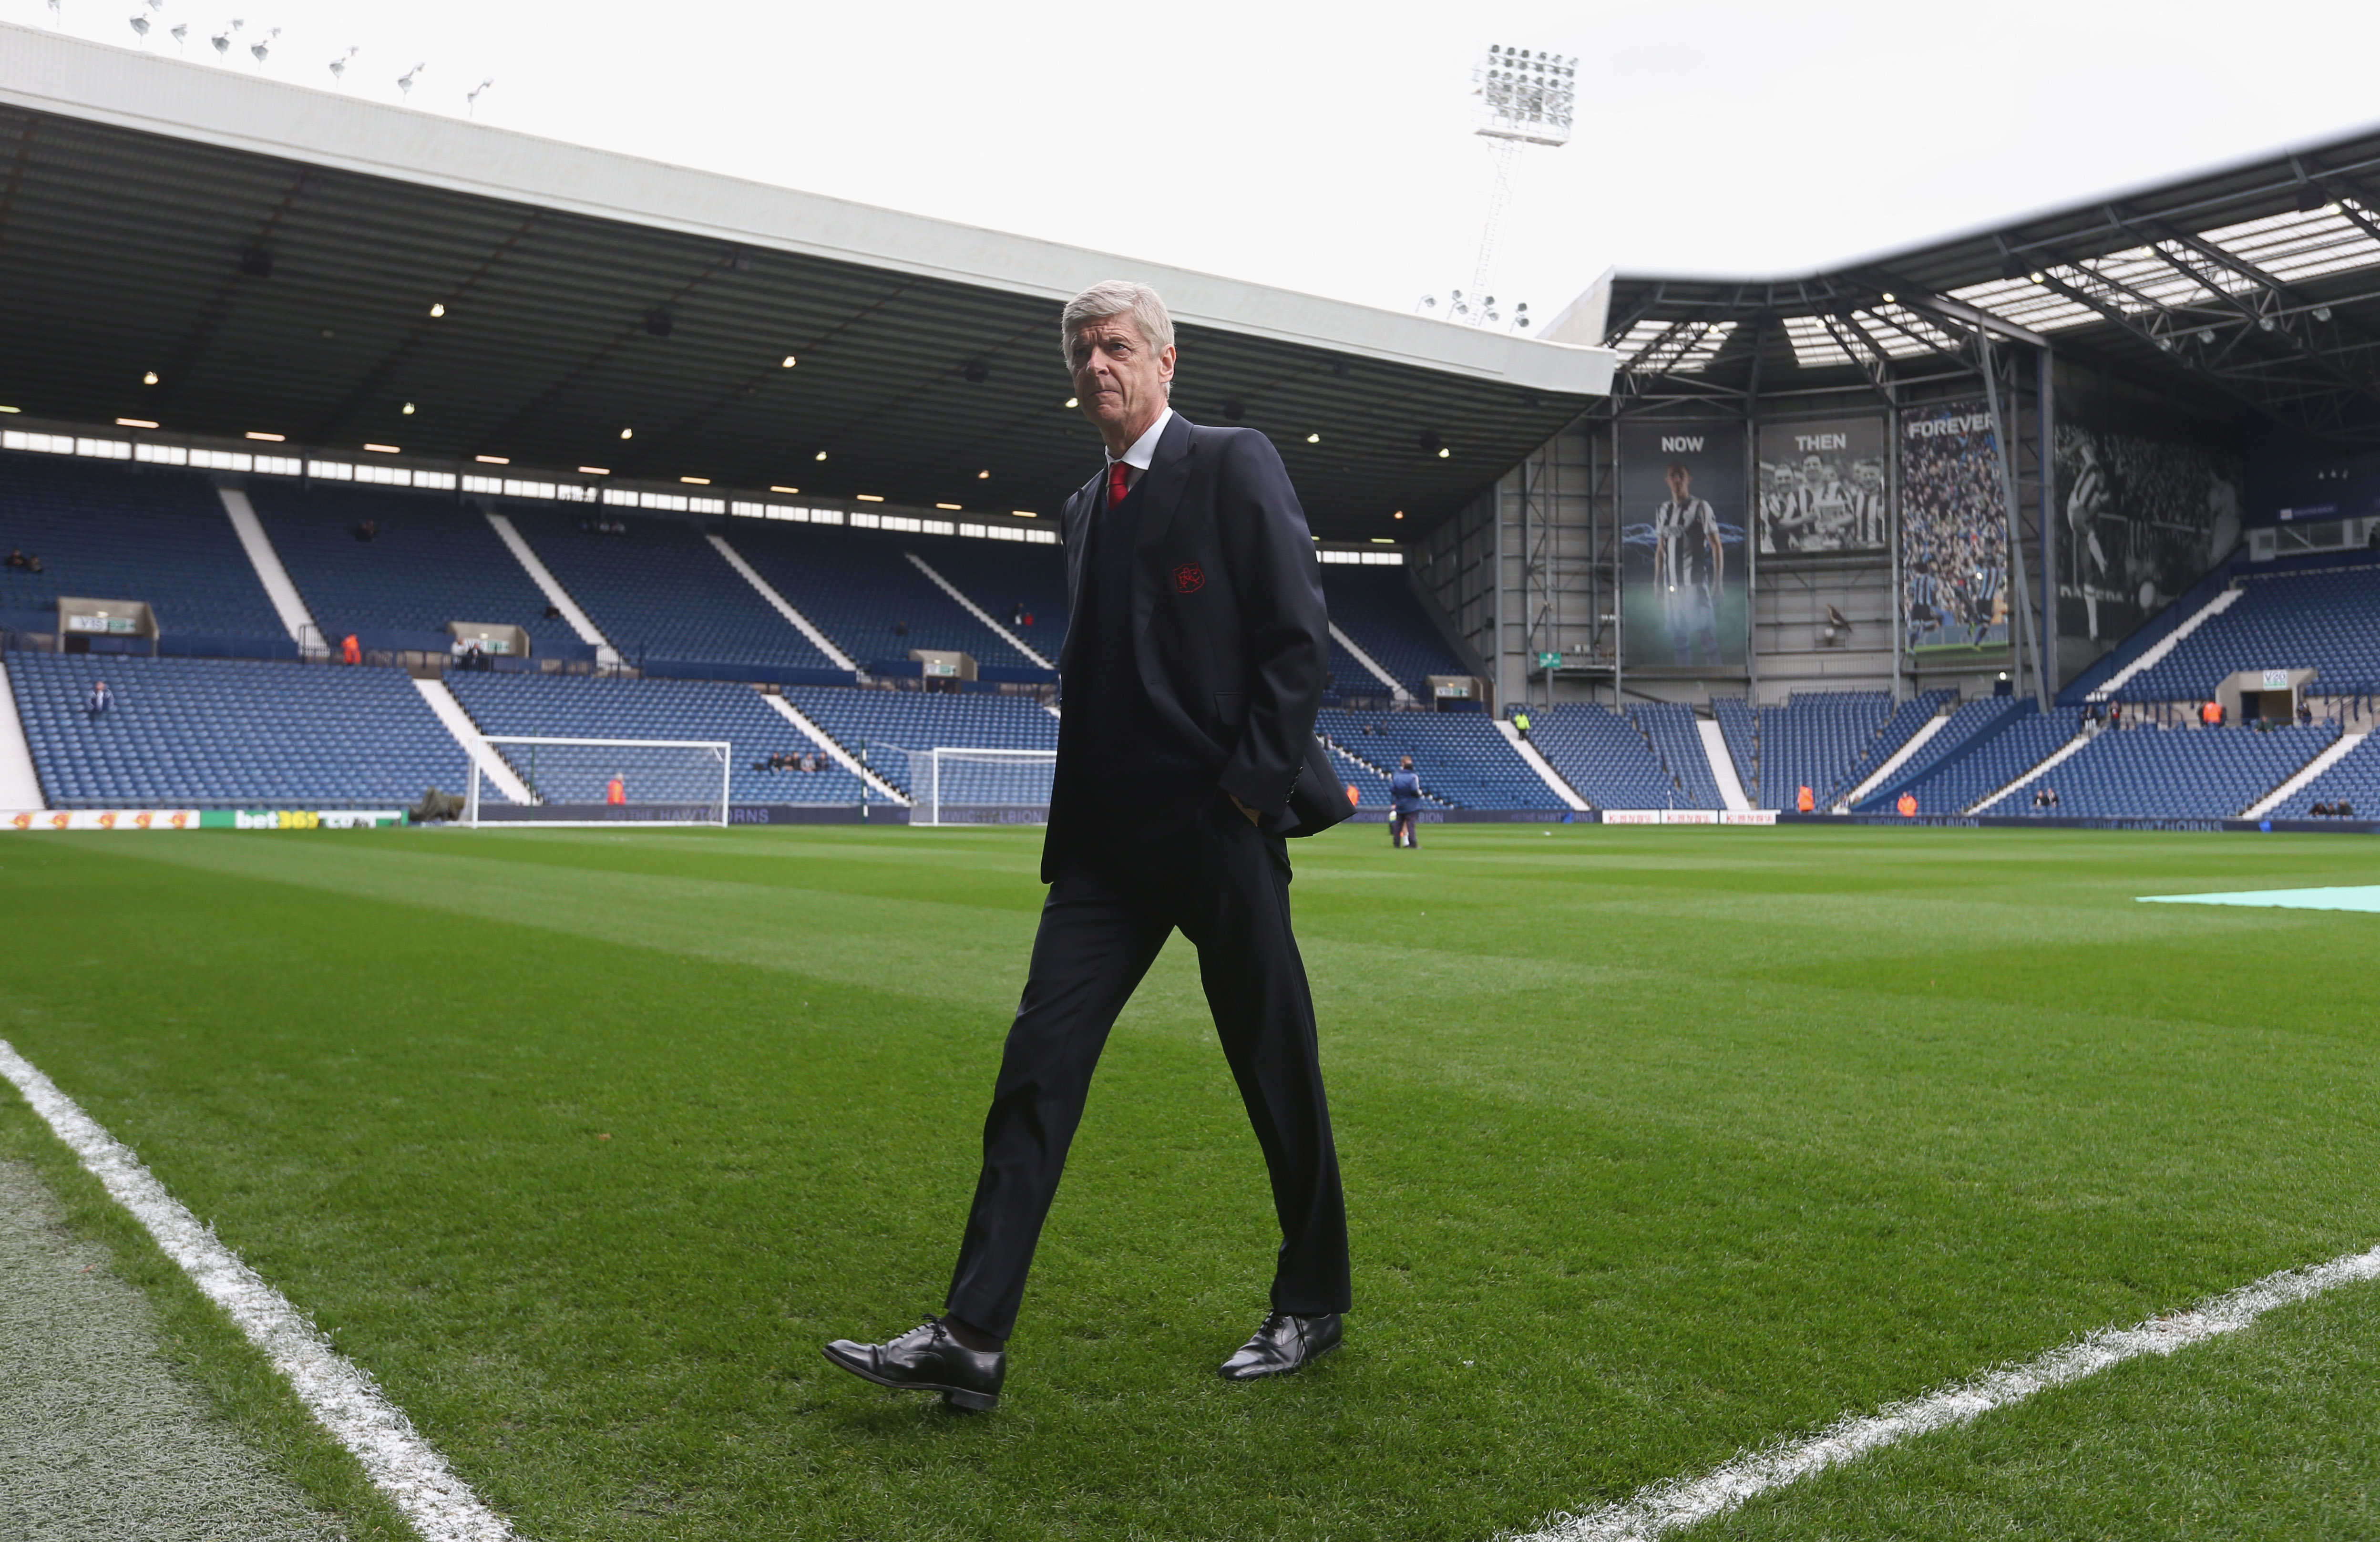 Wenger's future hinges on the fixture. (Picture Courtesy - AFP/Getty Images)